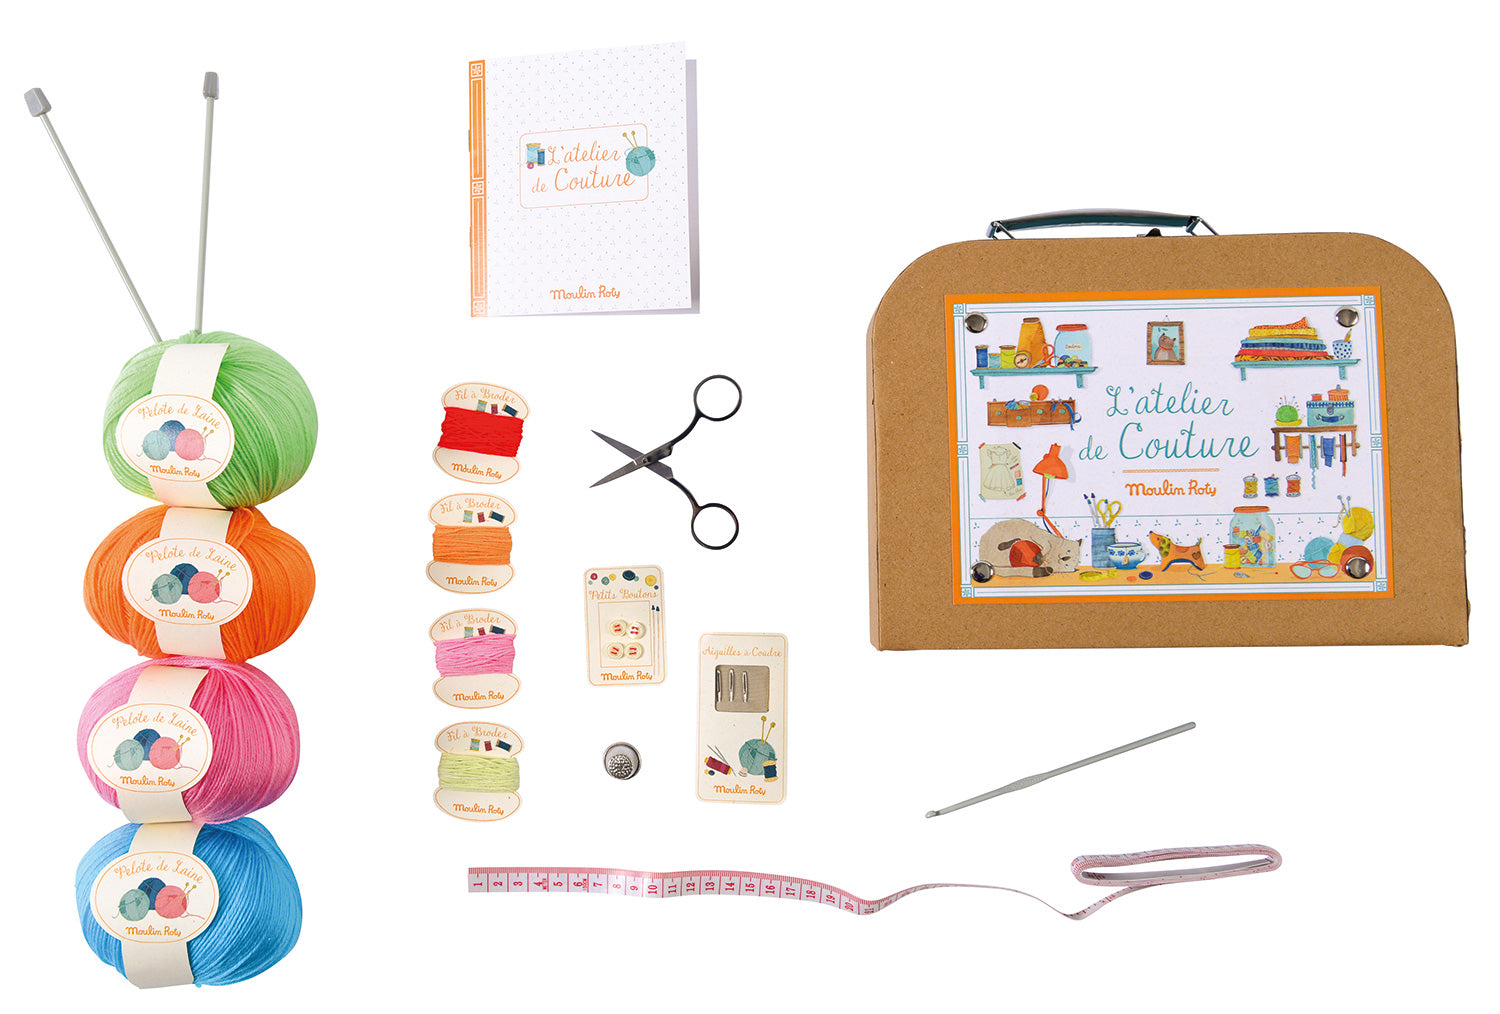 Moulin Roty Sewing Kit (Couture Jouets d'heir) Crochet /Knitting/Sewing!